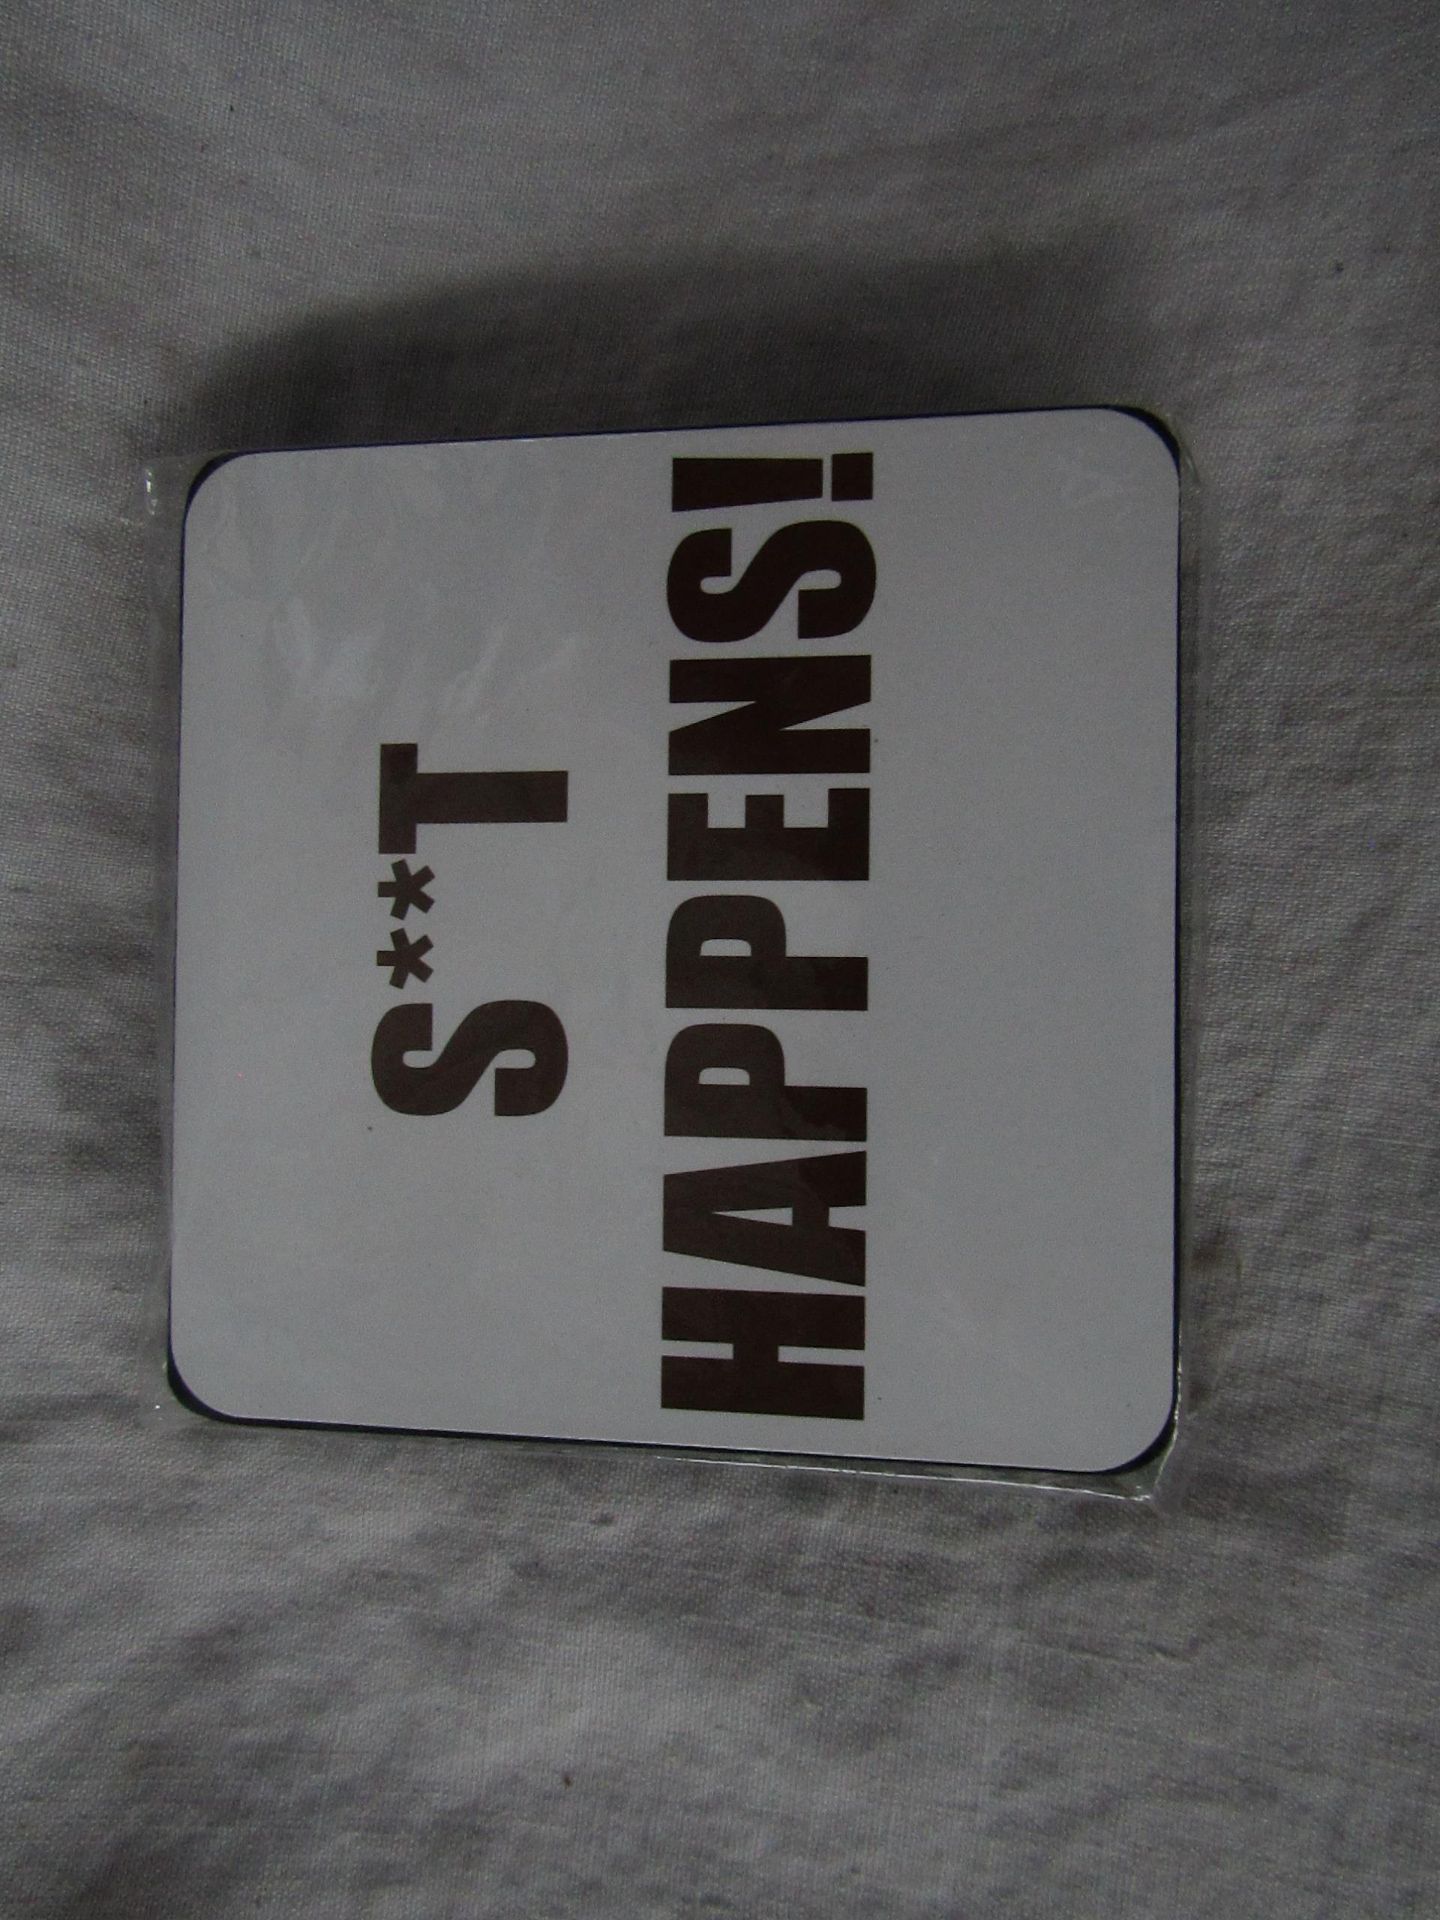 5x "SH** HAPPENS" - 6-Piece Coaster Sets - Unused & Packaged.